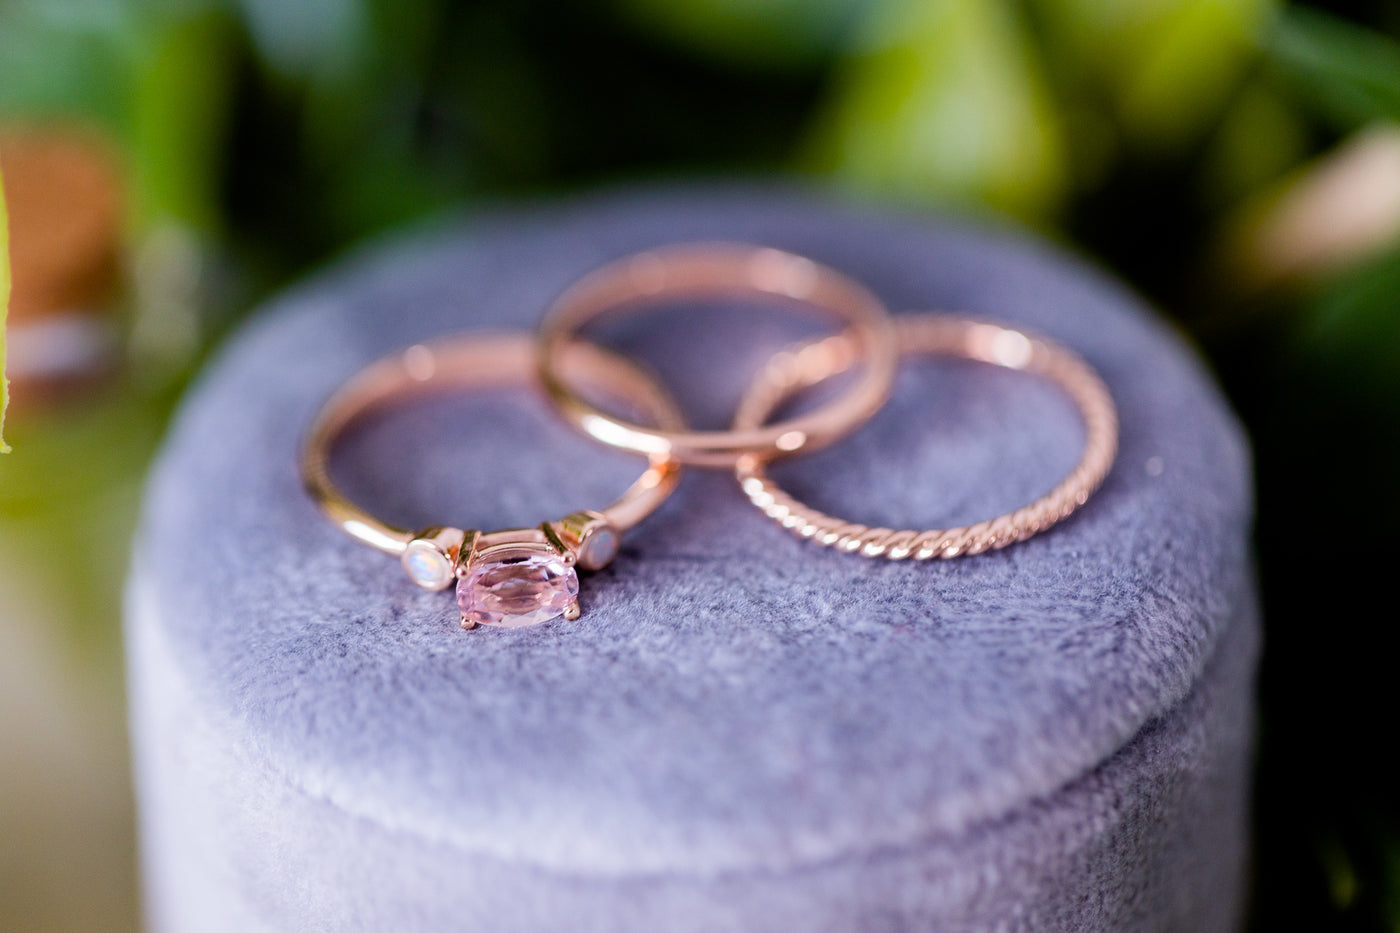 Perfect In Pink Gift Set: 3 Rings